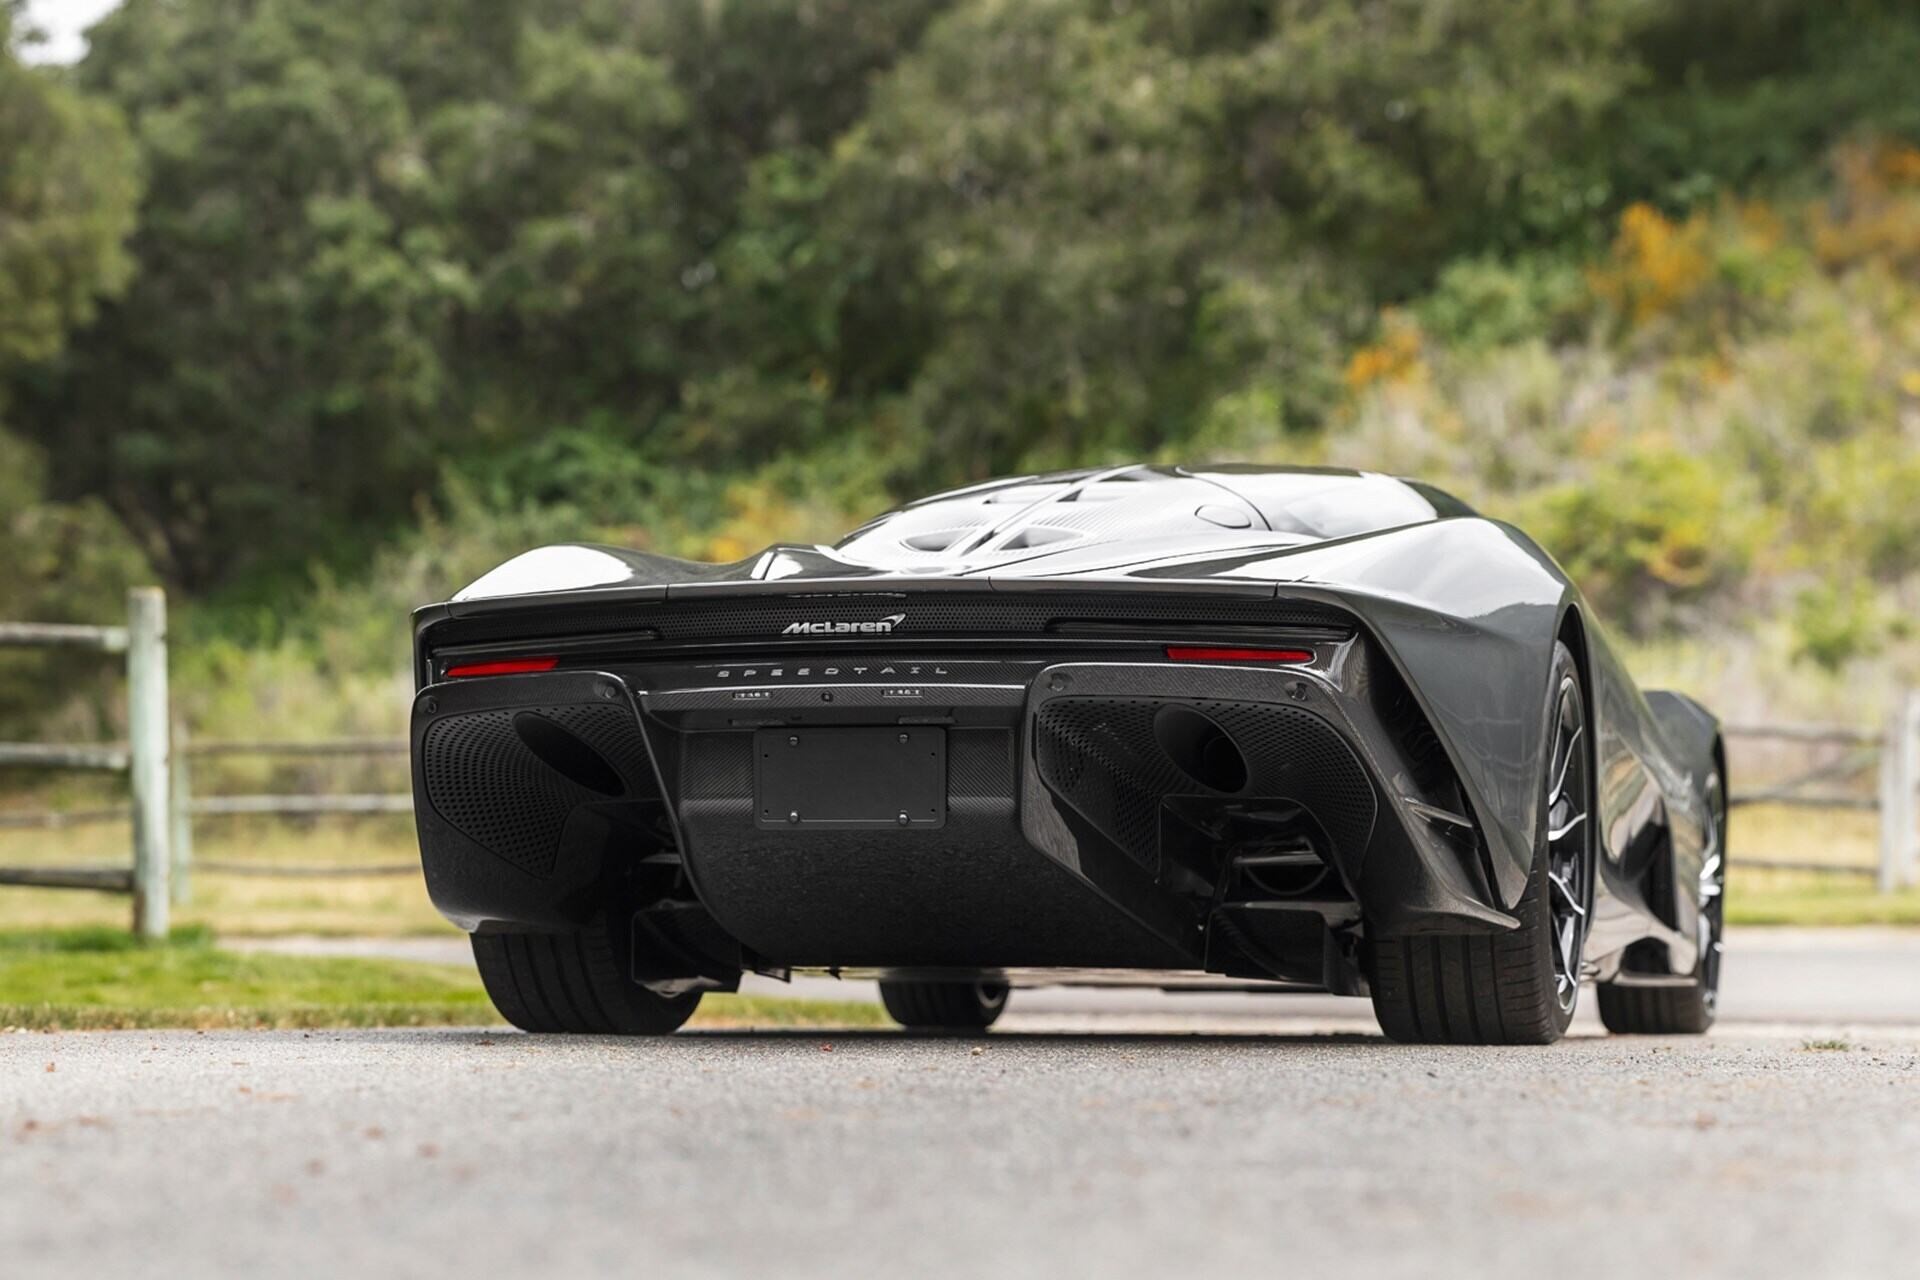 Rear-angled view of a 2020 Grey McLaren Speedtail.